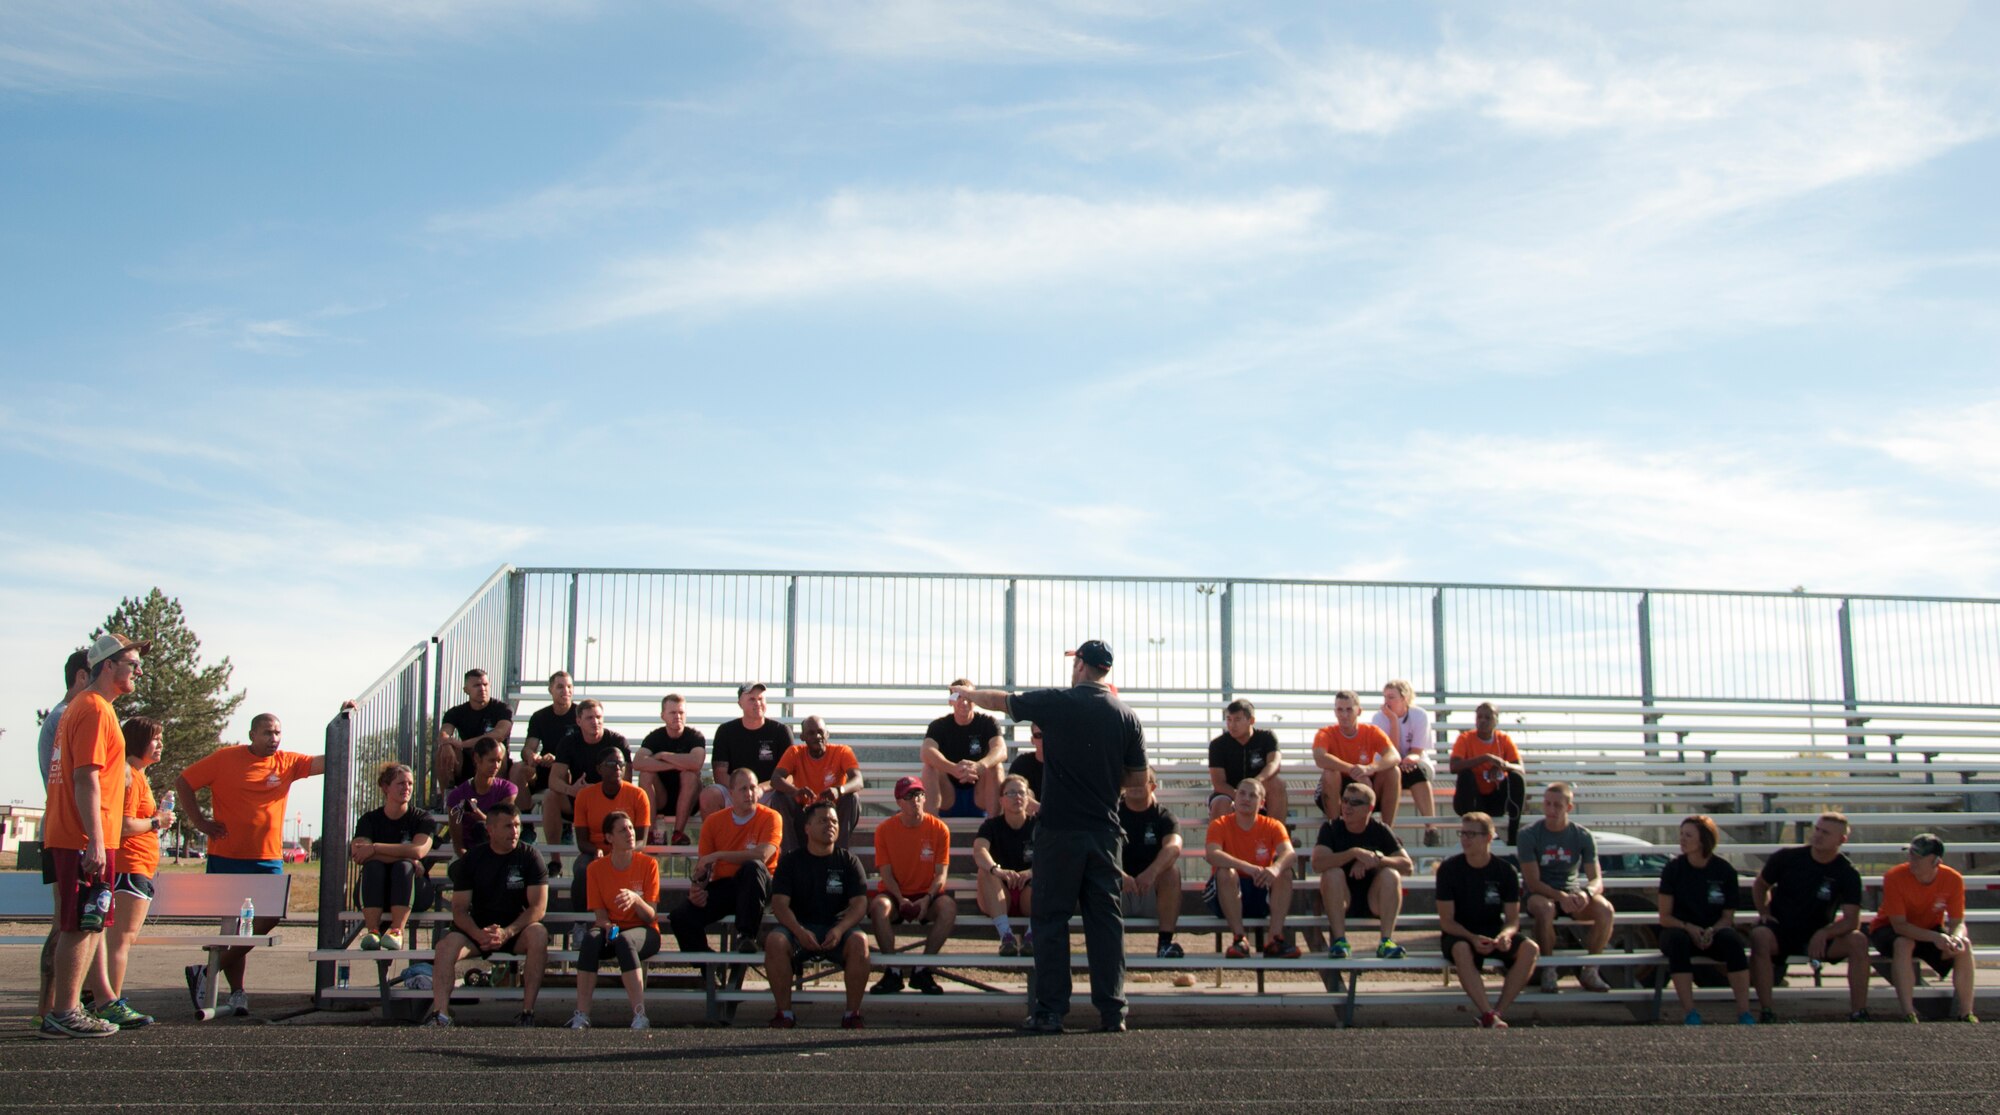 Jeffrey Heagerty, Buckley Outdoor Recreation Center manager, standing center, briefs participants before the start of the Team Cohesion Challenge 5K Oct. 7, 2014, at the track on Buckley Air Force Base, Colo. The 5K kicked off the Team Cohesion Challenge, a GORUCK event made available to all Team Buckley members to incorporate the Five C's of Comprehensive Airmen Fitness: Caring, Committing, Connecting, Communicating and Celebrating. (U.S. Air Force photo by Tech. Sgt. Kali L. Gradishar/Released) 